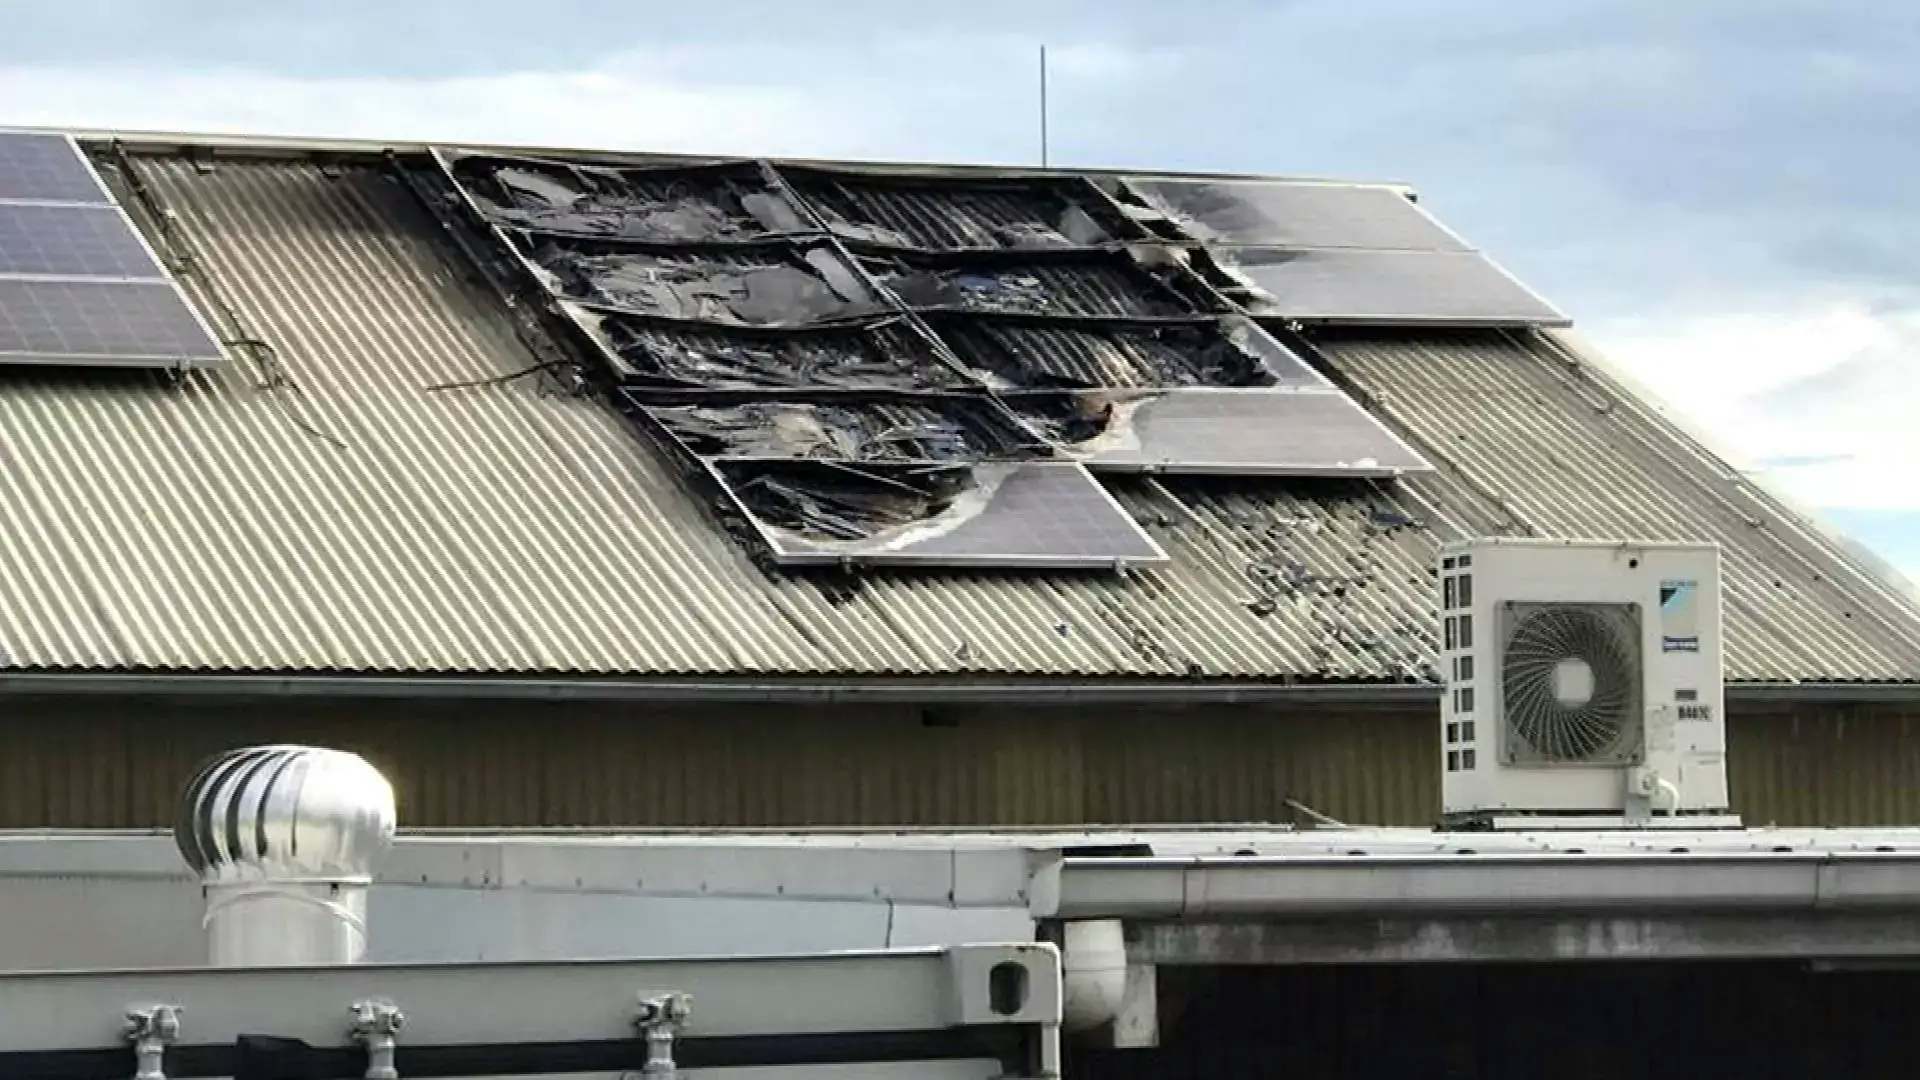 burned solar panels installed on a roof